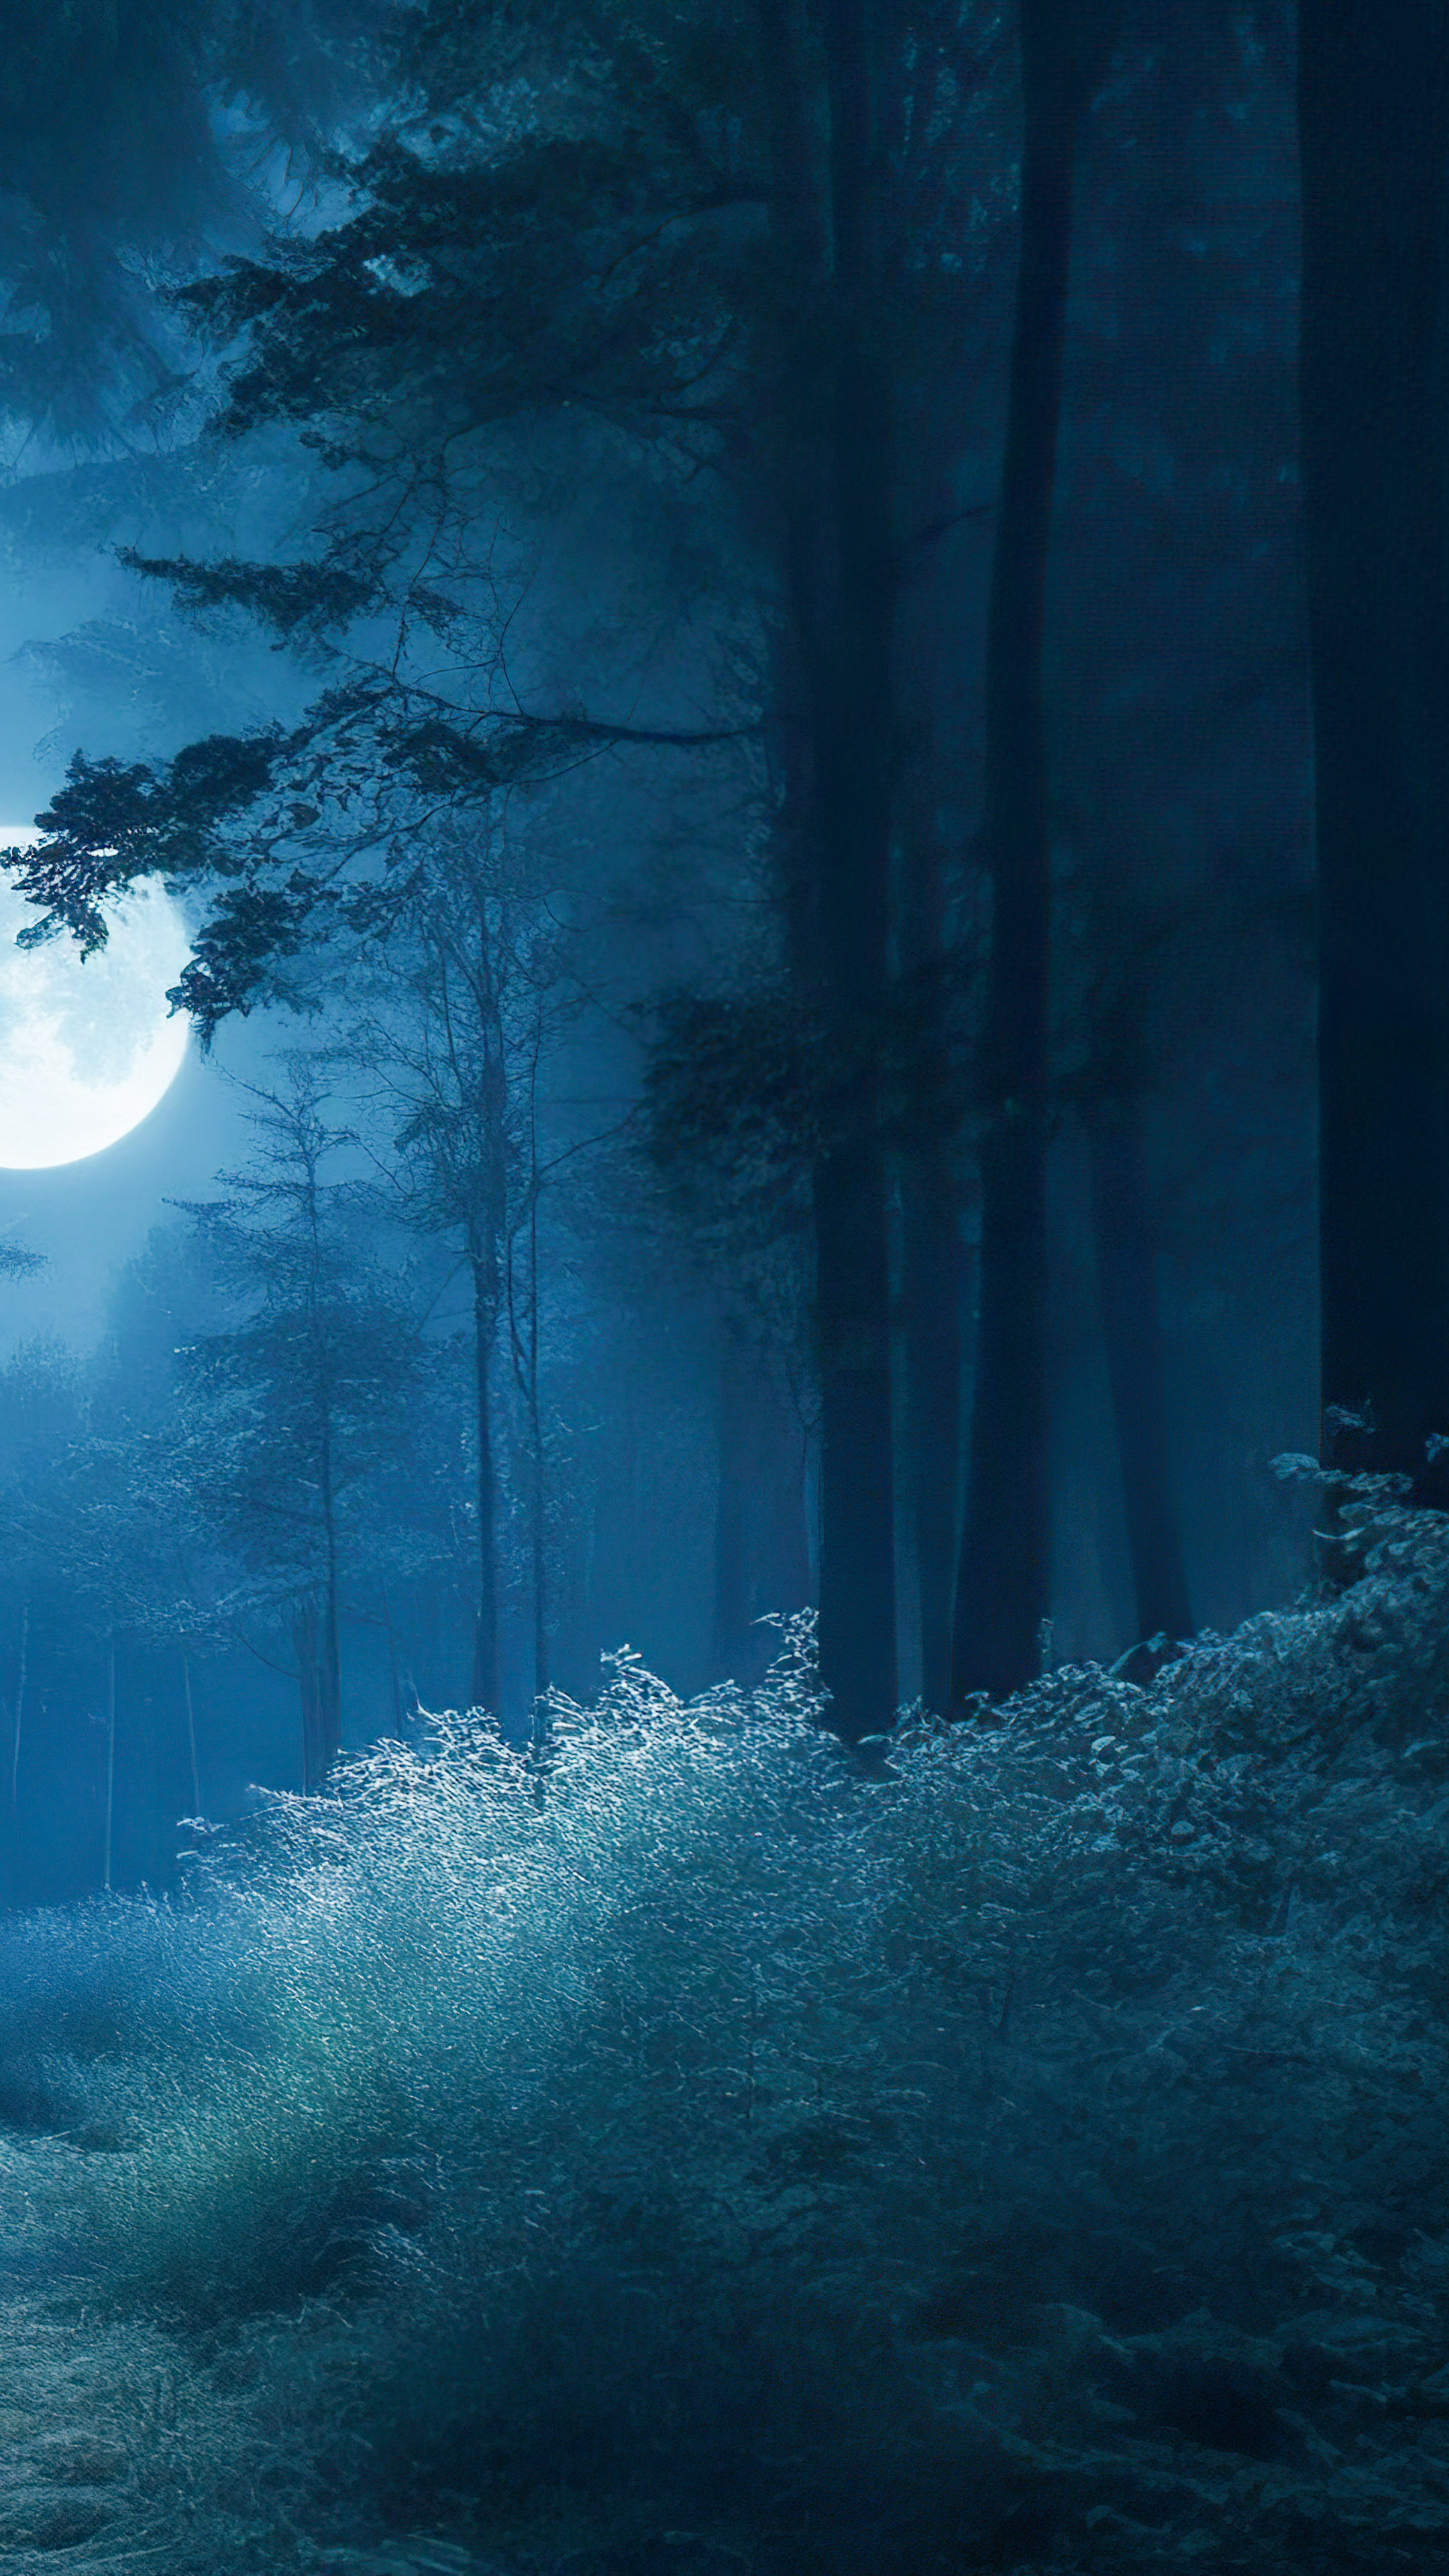 Get lost in the magic of a mysterious forest at night, where moonlight filters through the trees, creating an enchanting and eerie atmosphere with our nature iPhone wallpaper.